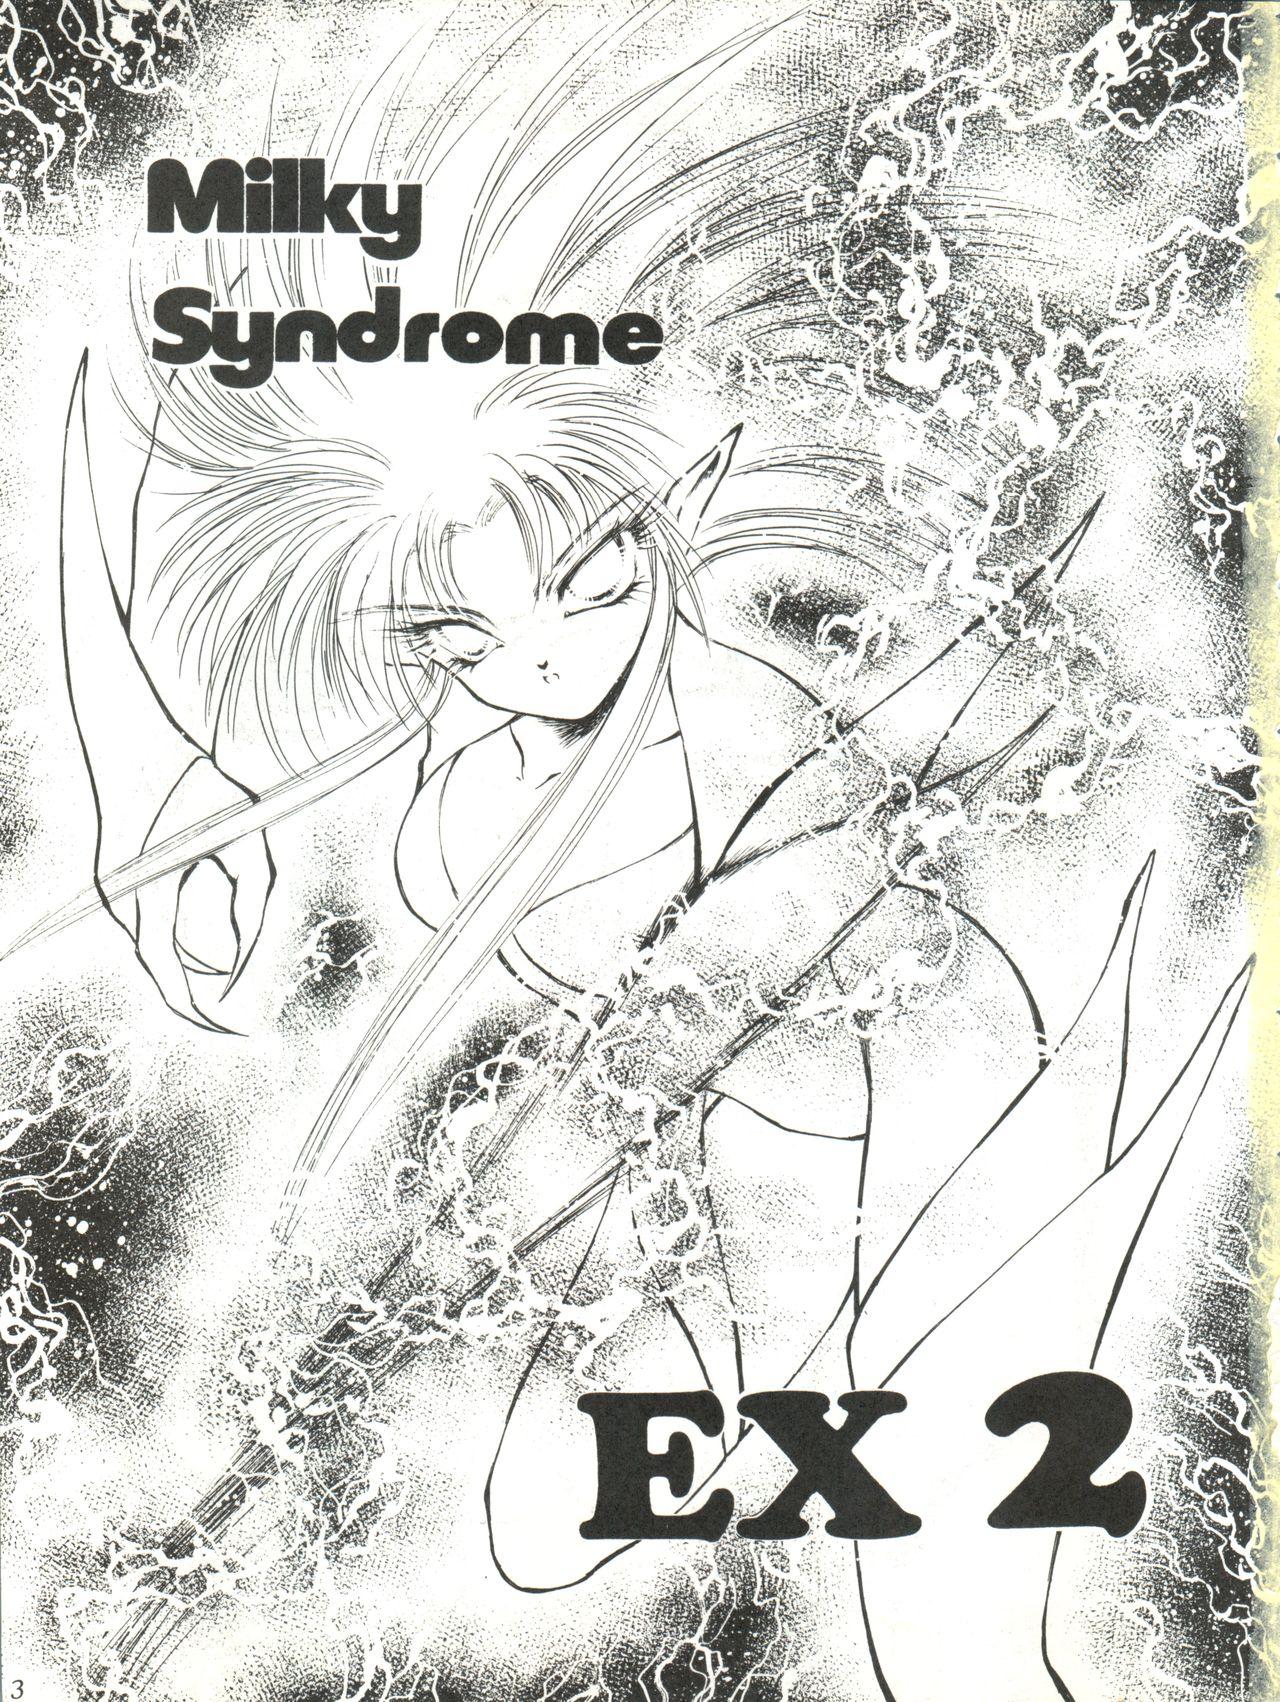 Italiana Milky Syndrome EX 2 - Sailor moon Tenchi muyo Pretty sammy Ghost sweeper mikami Ng knight lamune and 40 Blow Job - Page 3